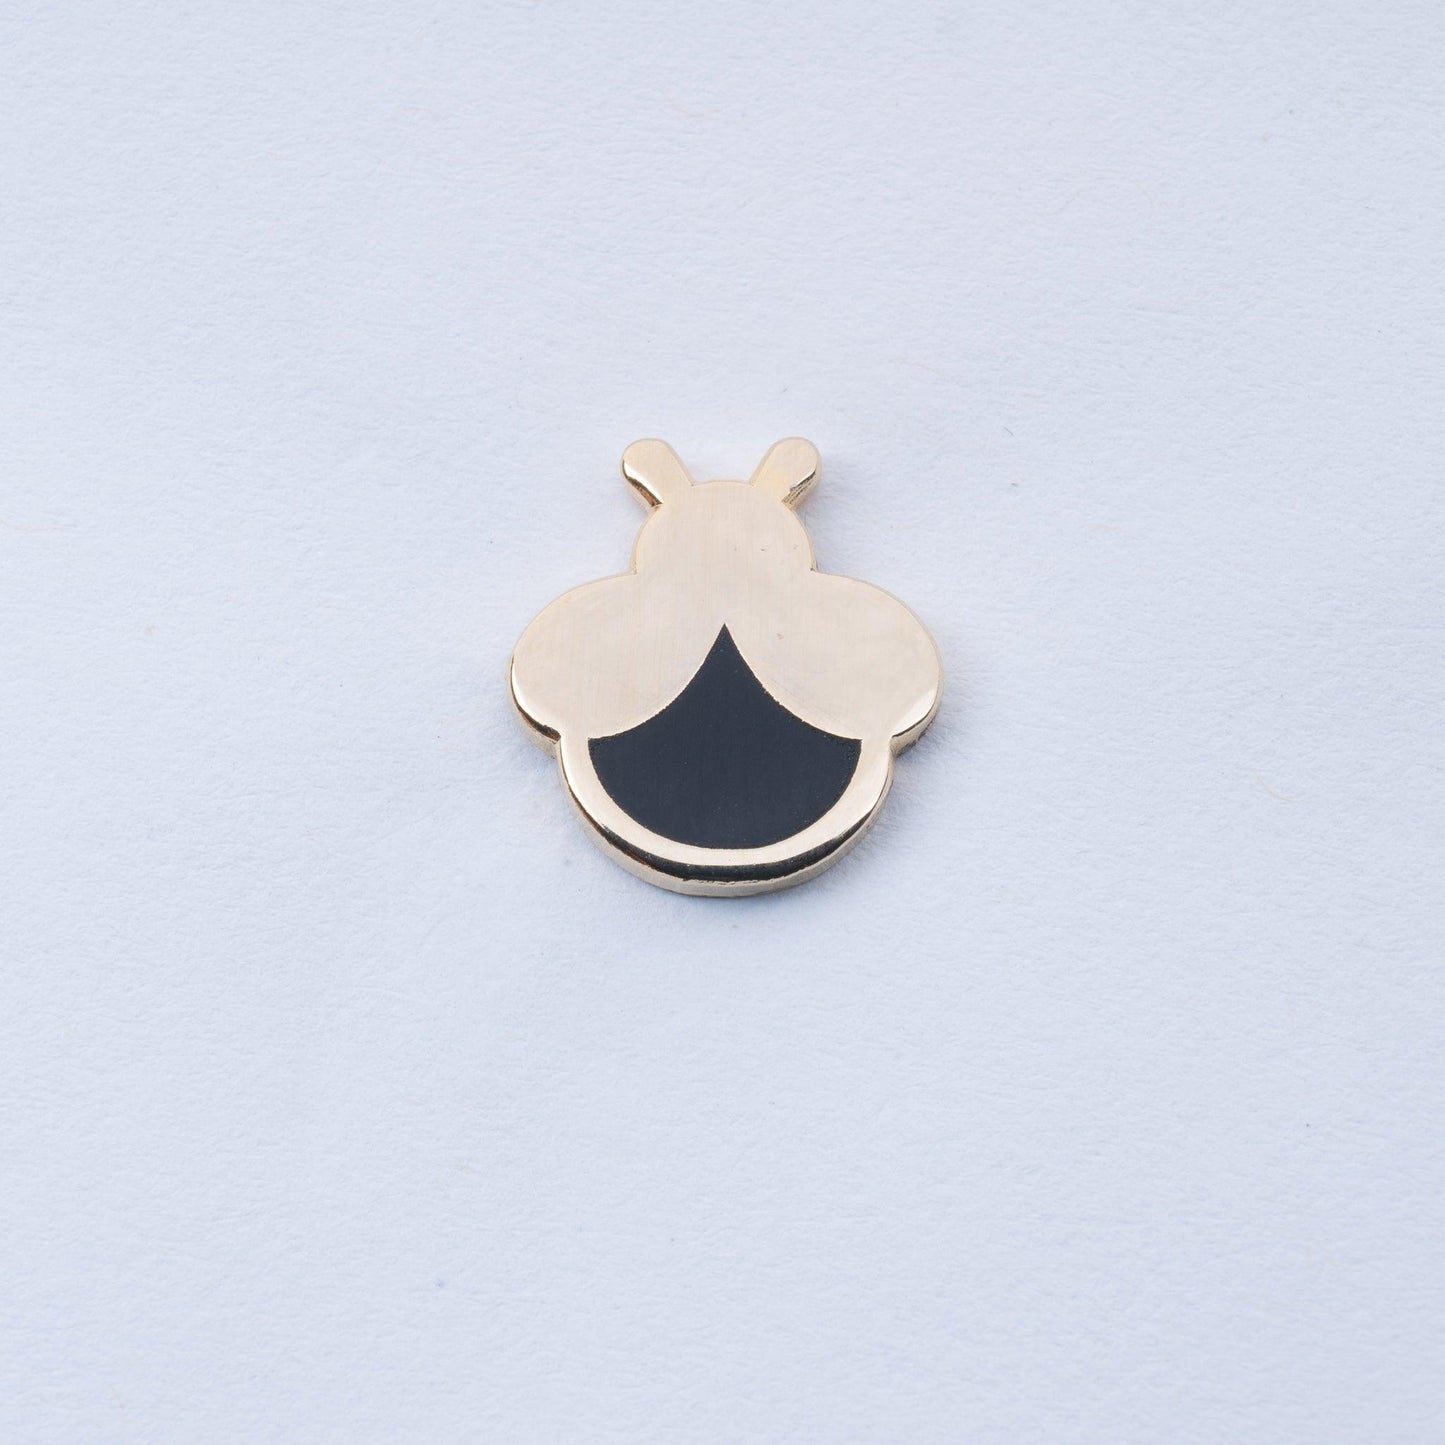 gold plated mini firefly enamel pin with black body that glows in the dark